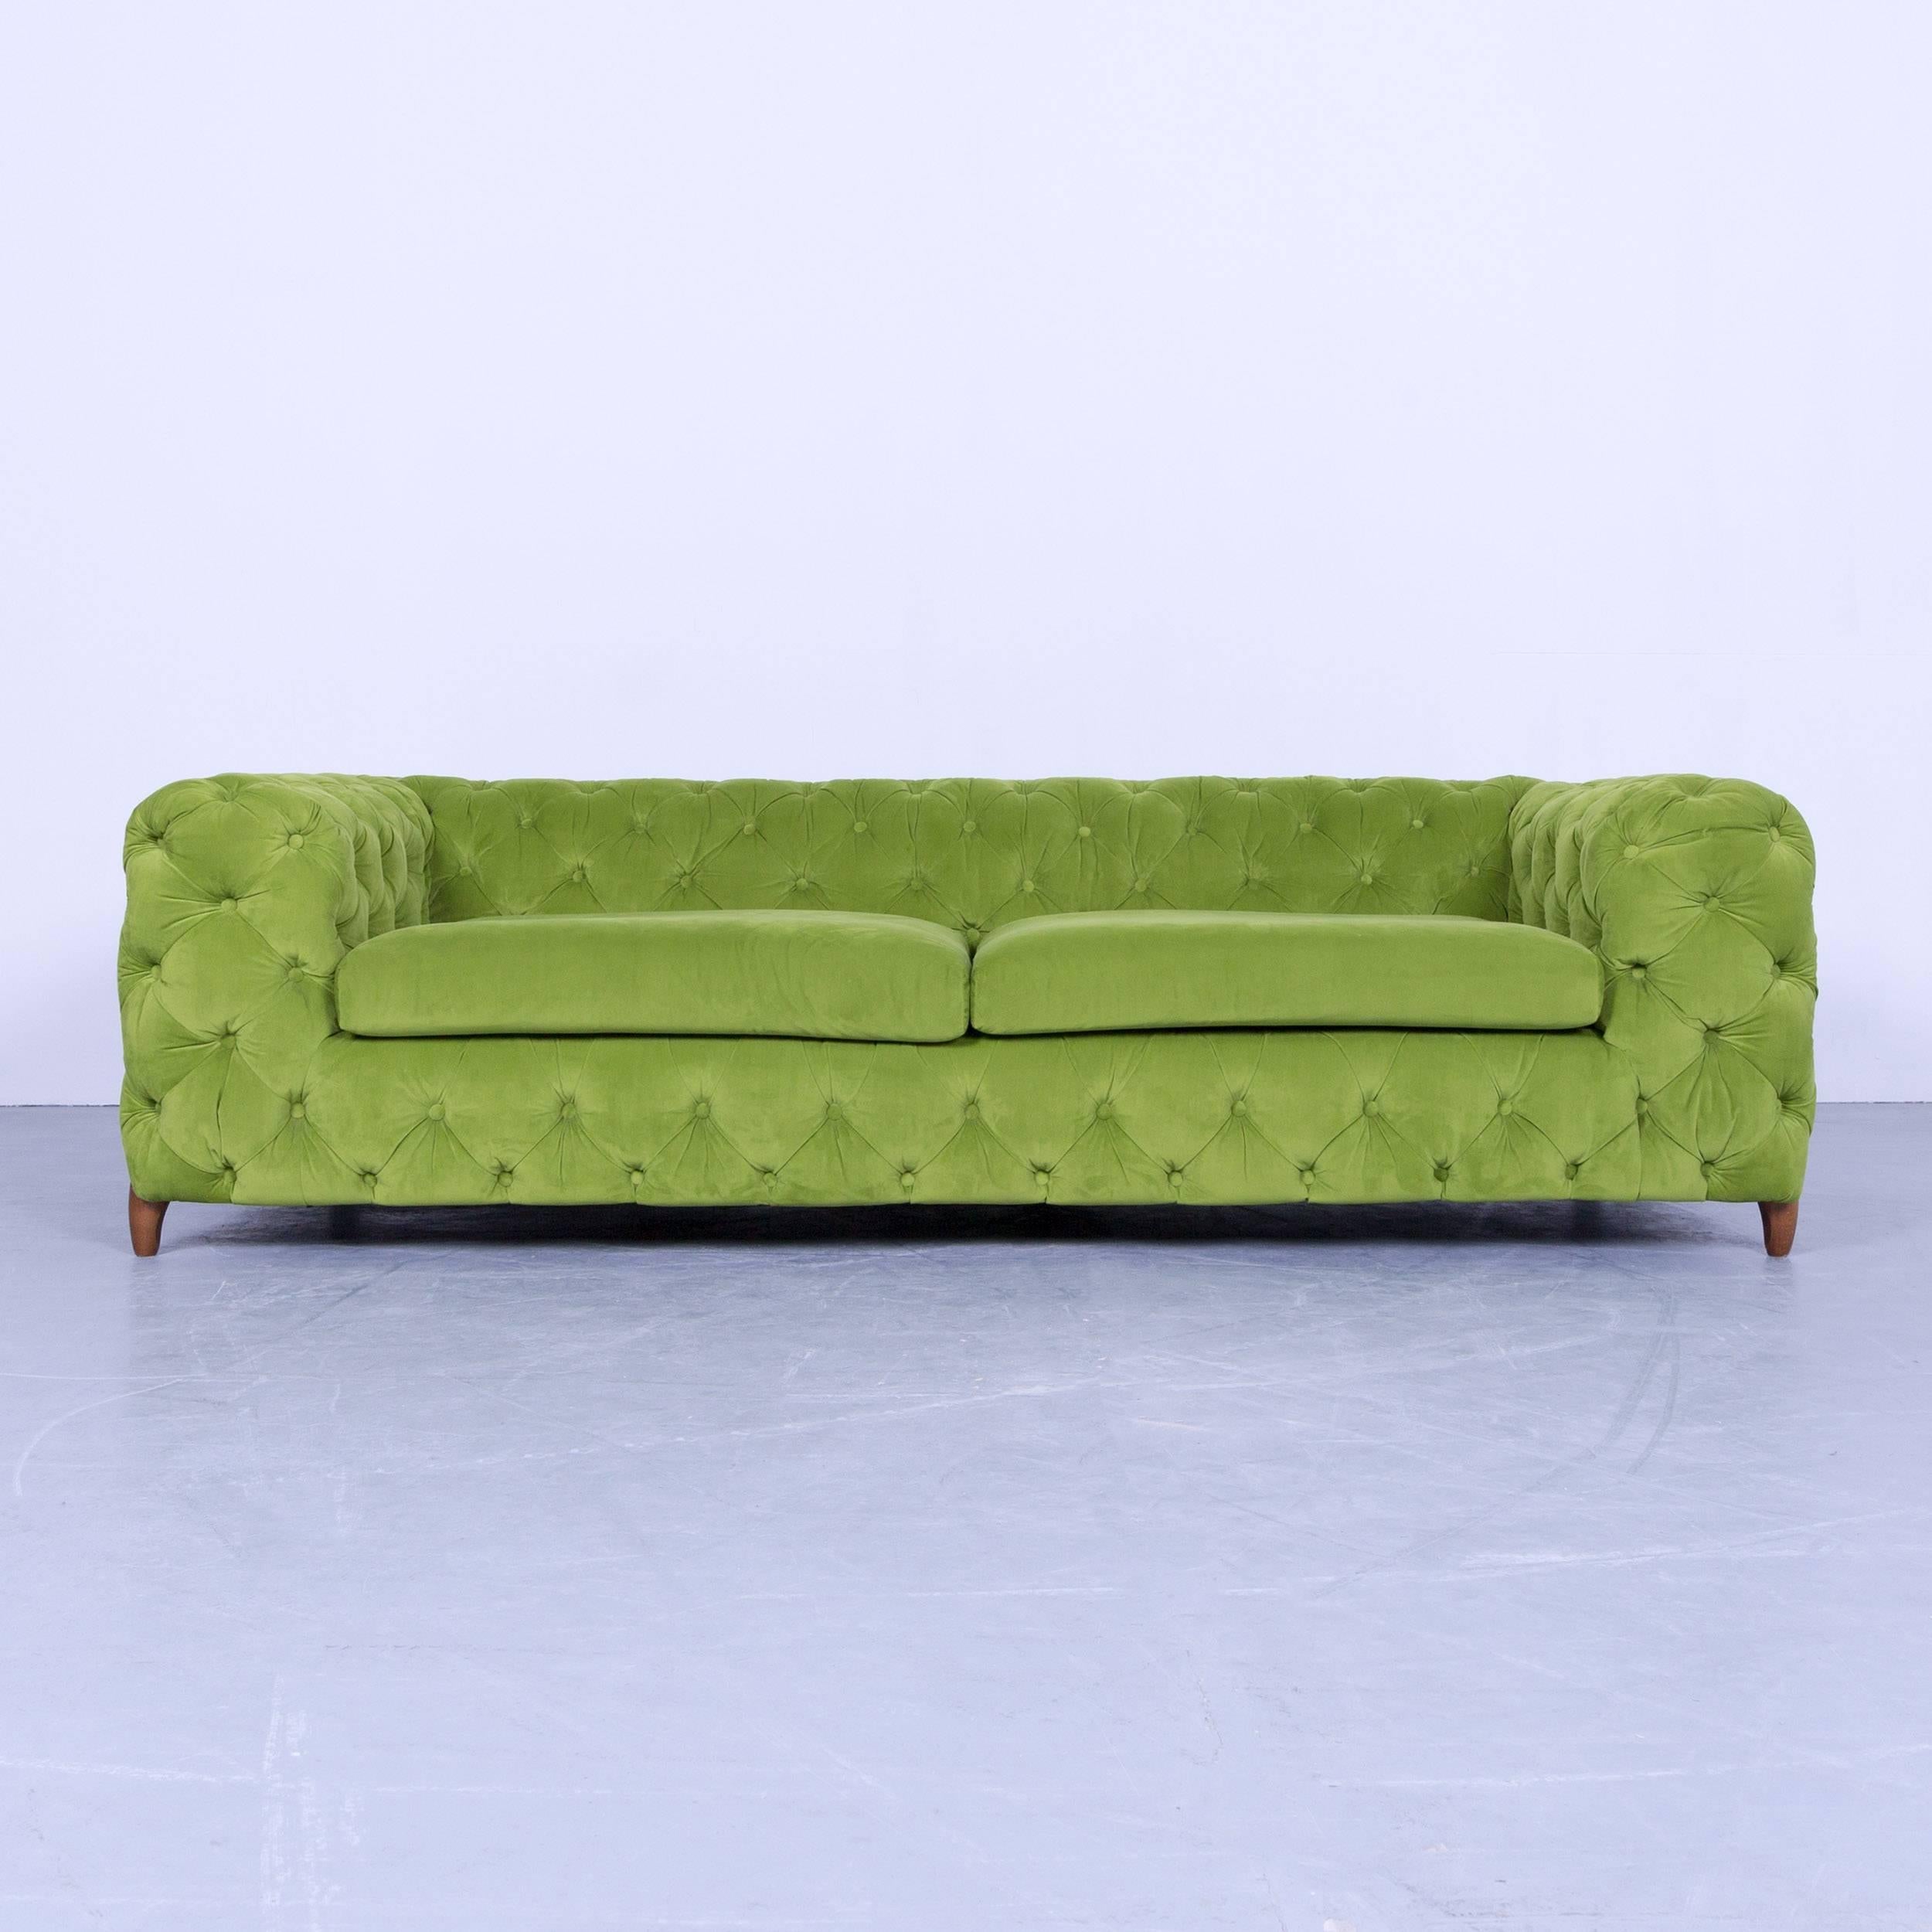 Leather Original Kare Designer Sofa Set Fabric Green and Blue Three-Seat Couch Modern